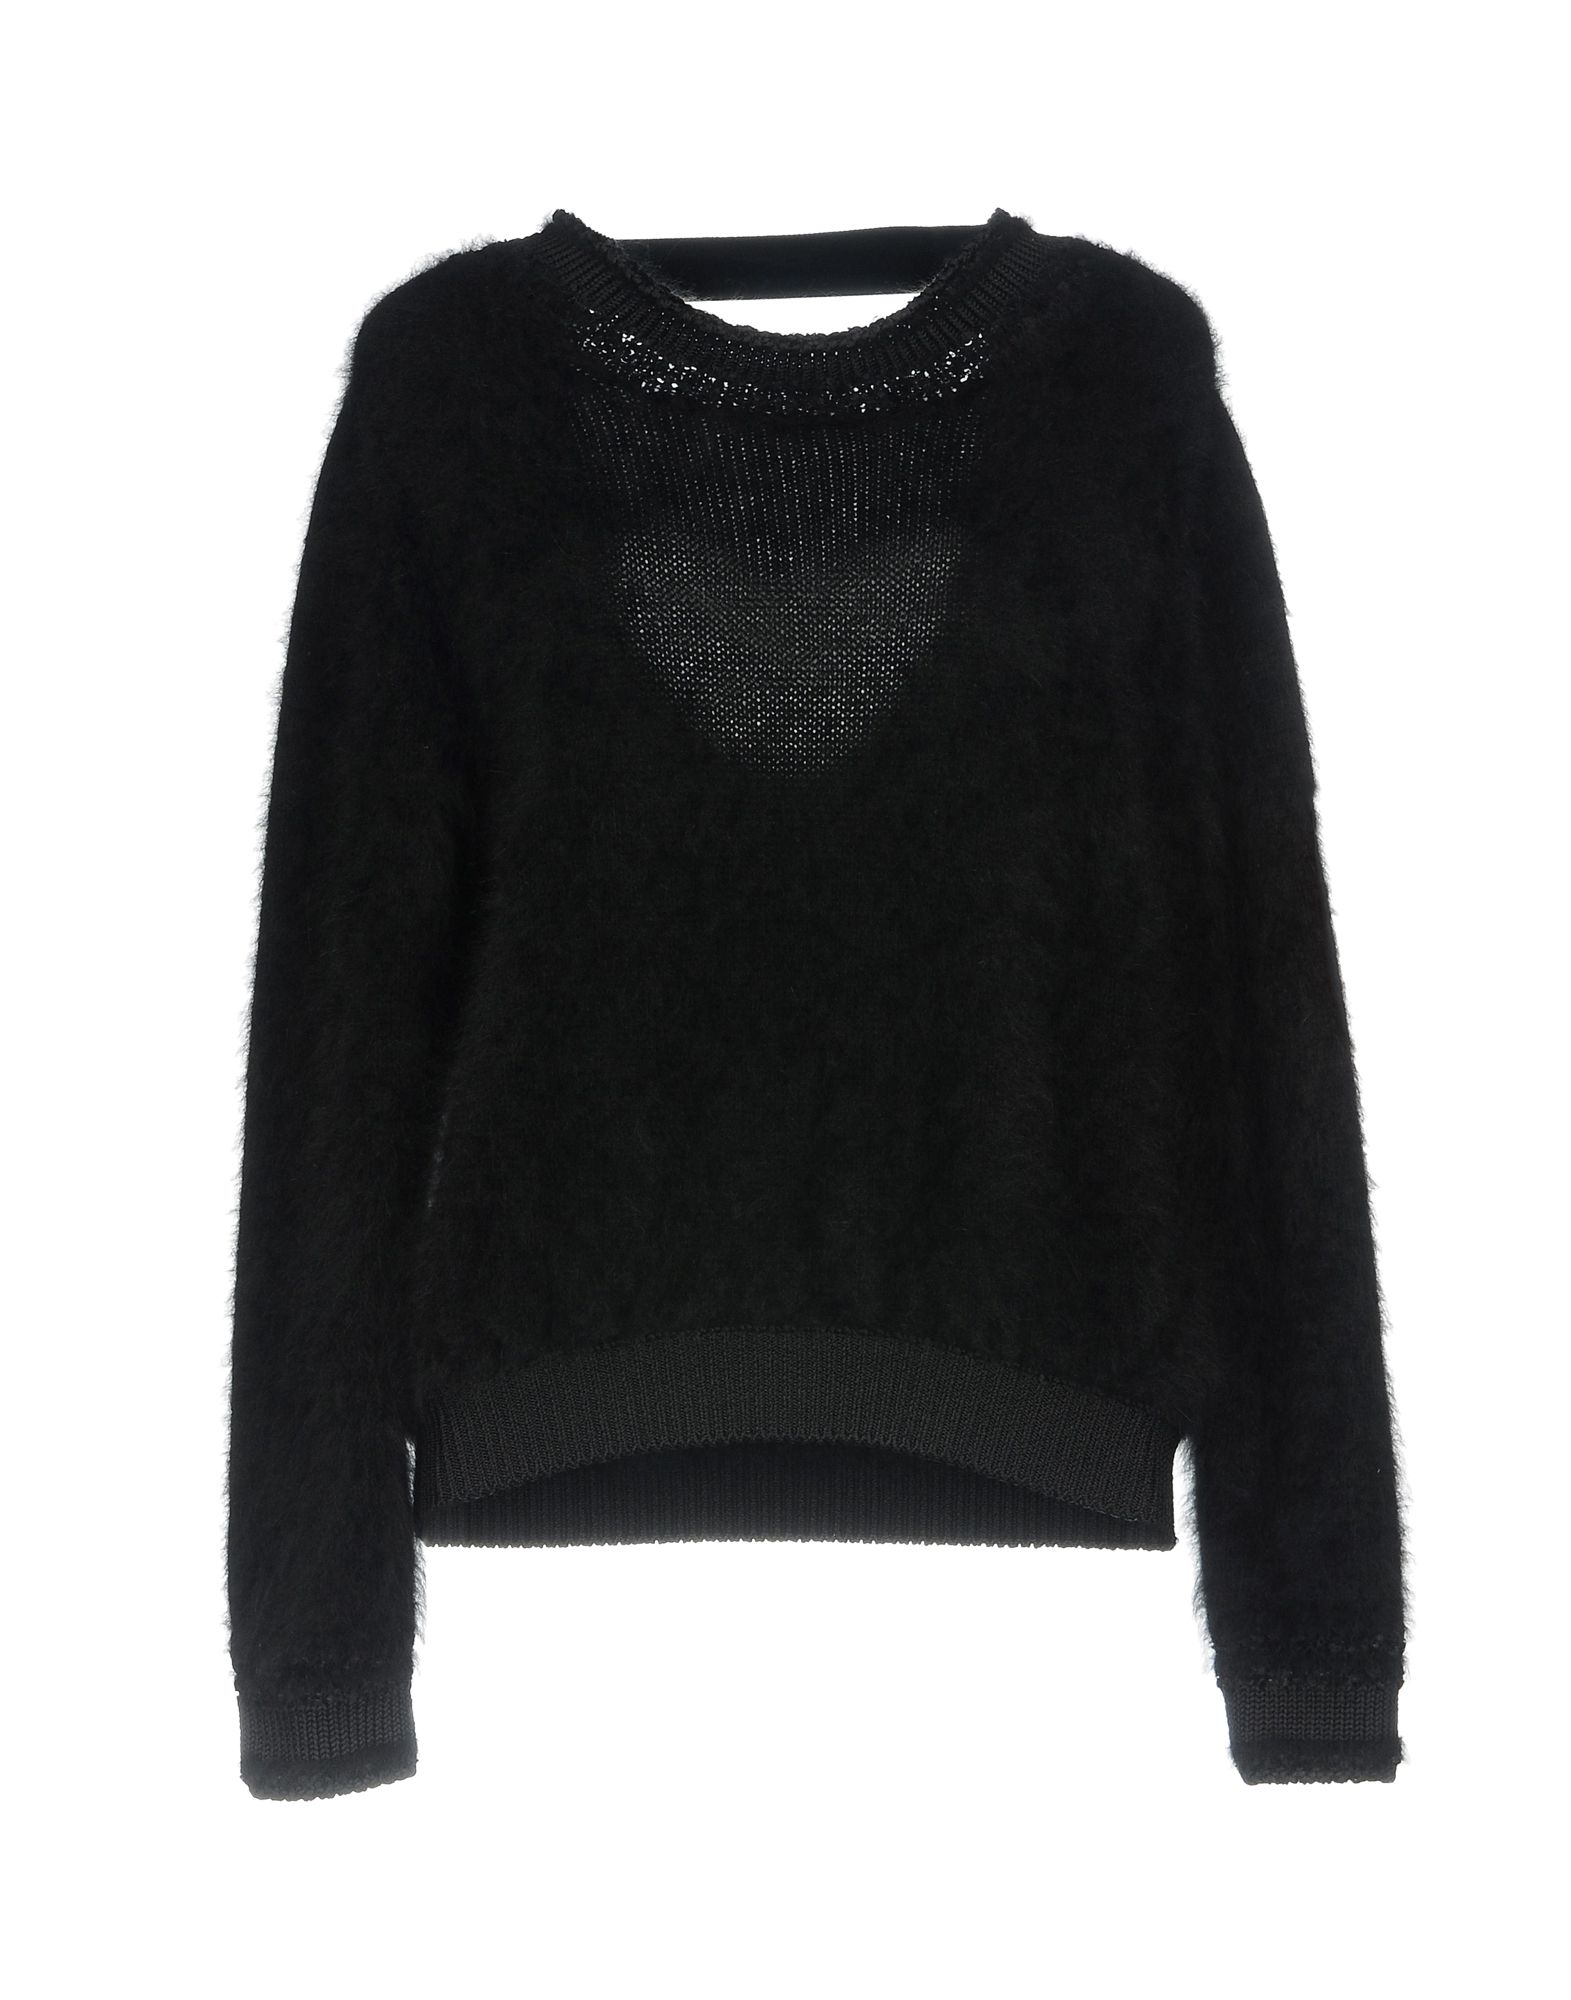 TOM FORD Sweater,39818024GO 6